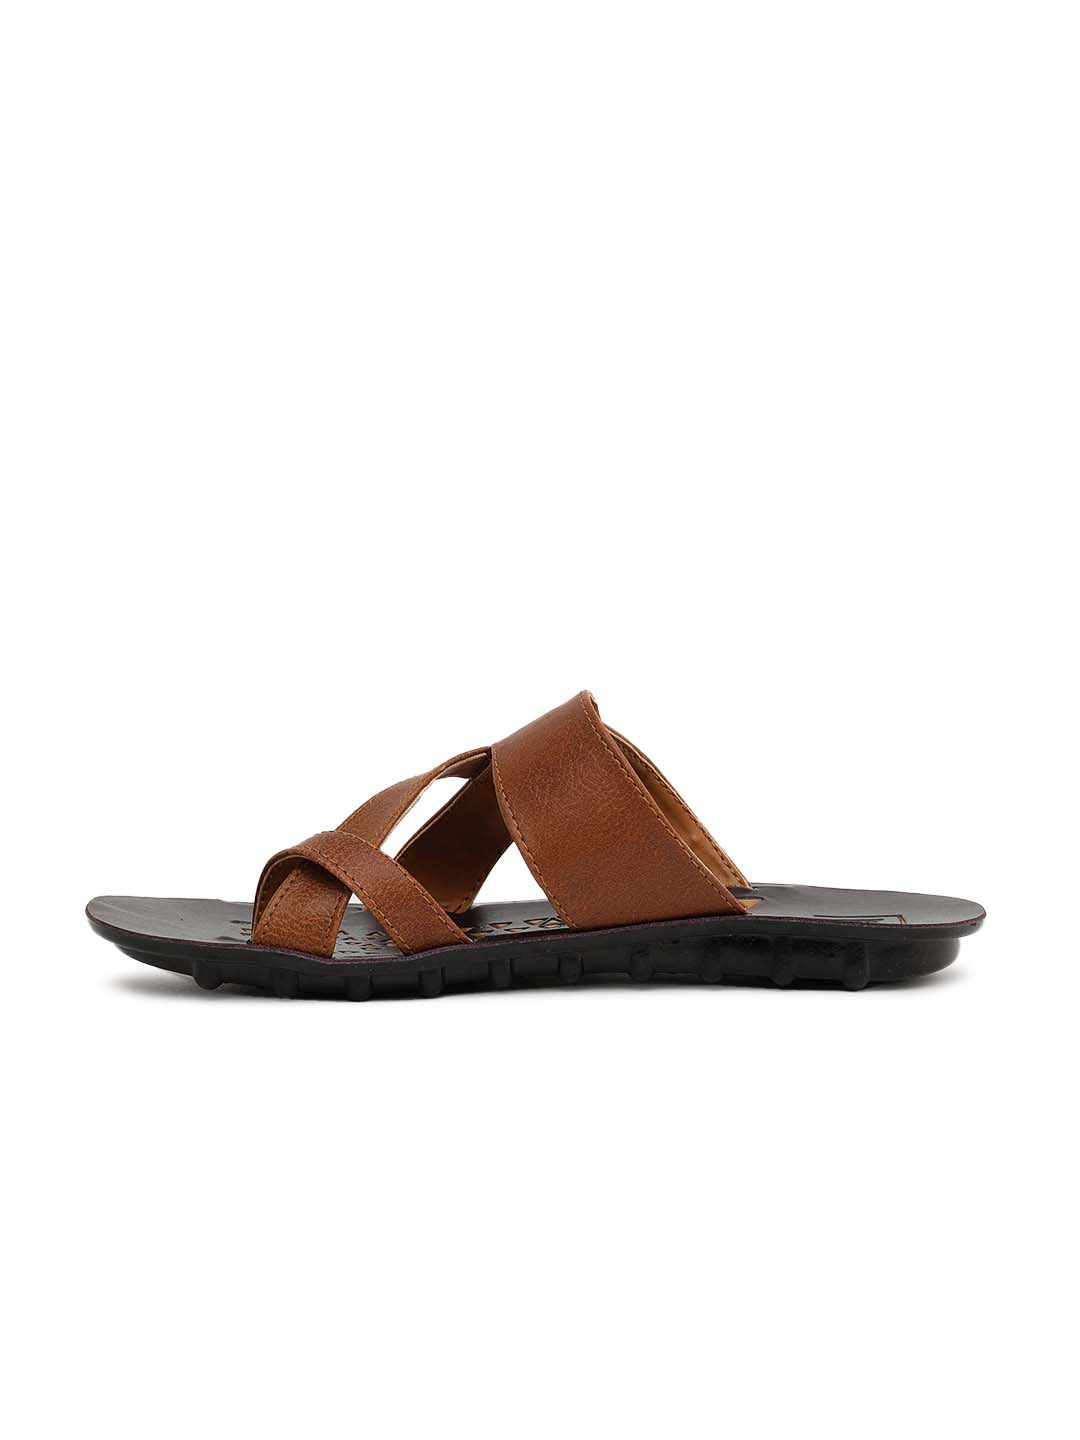 Paragon PU6883G Men Stylish Sandals | Comfortable Sandals for Daily Outdoor Use | Casual Formal Sandals with Cushioned Soles